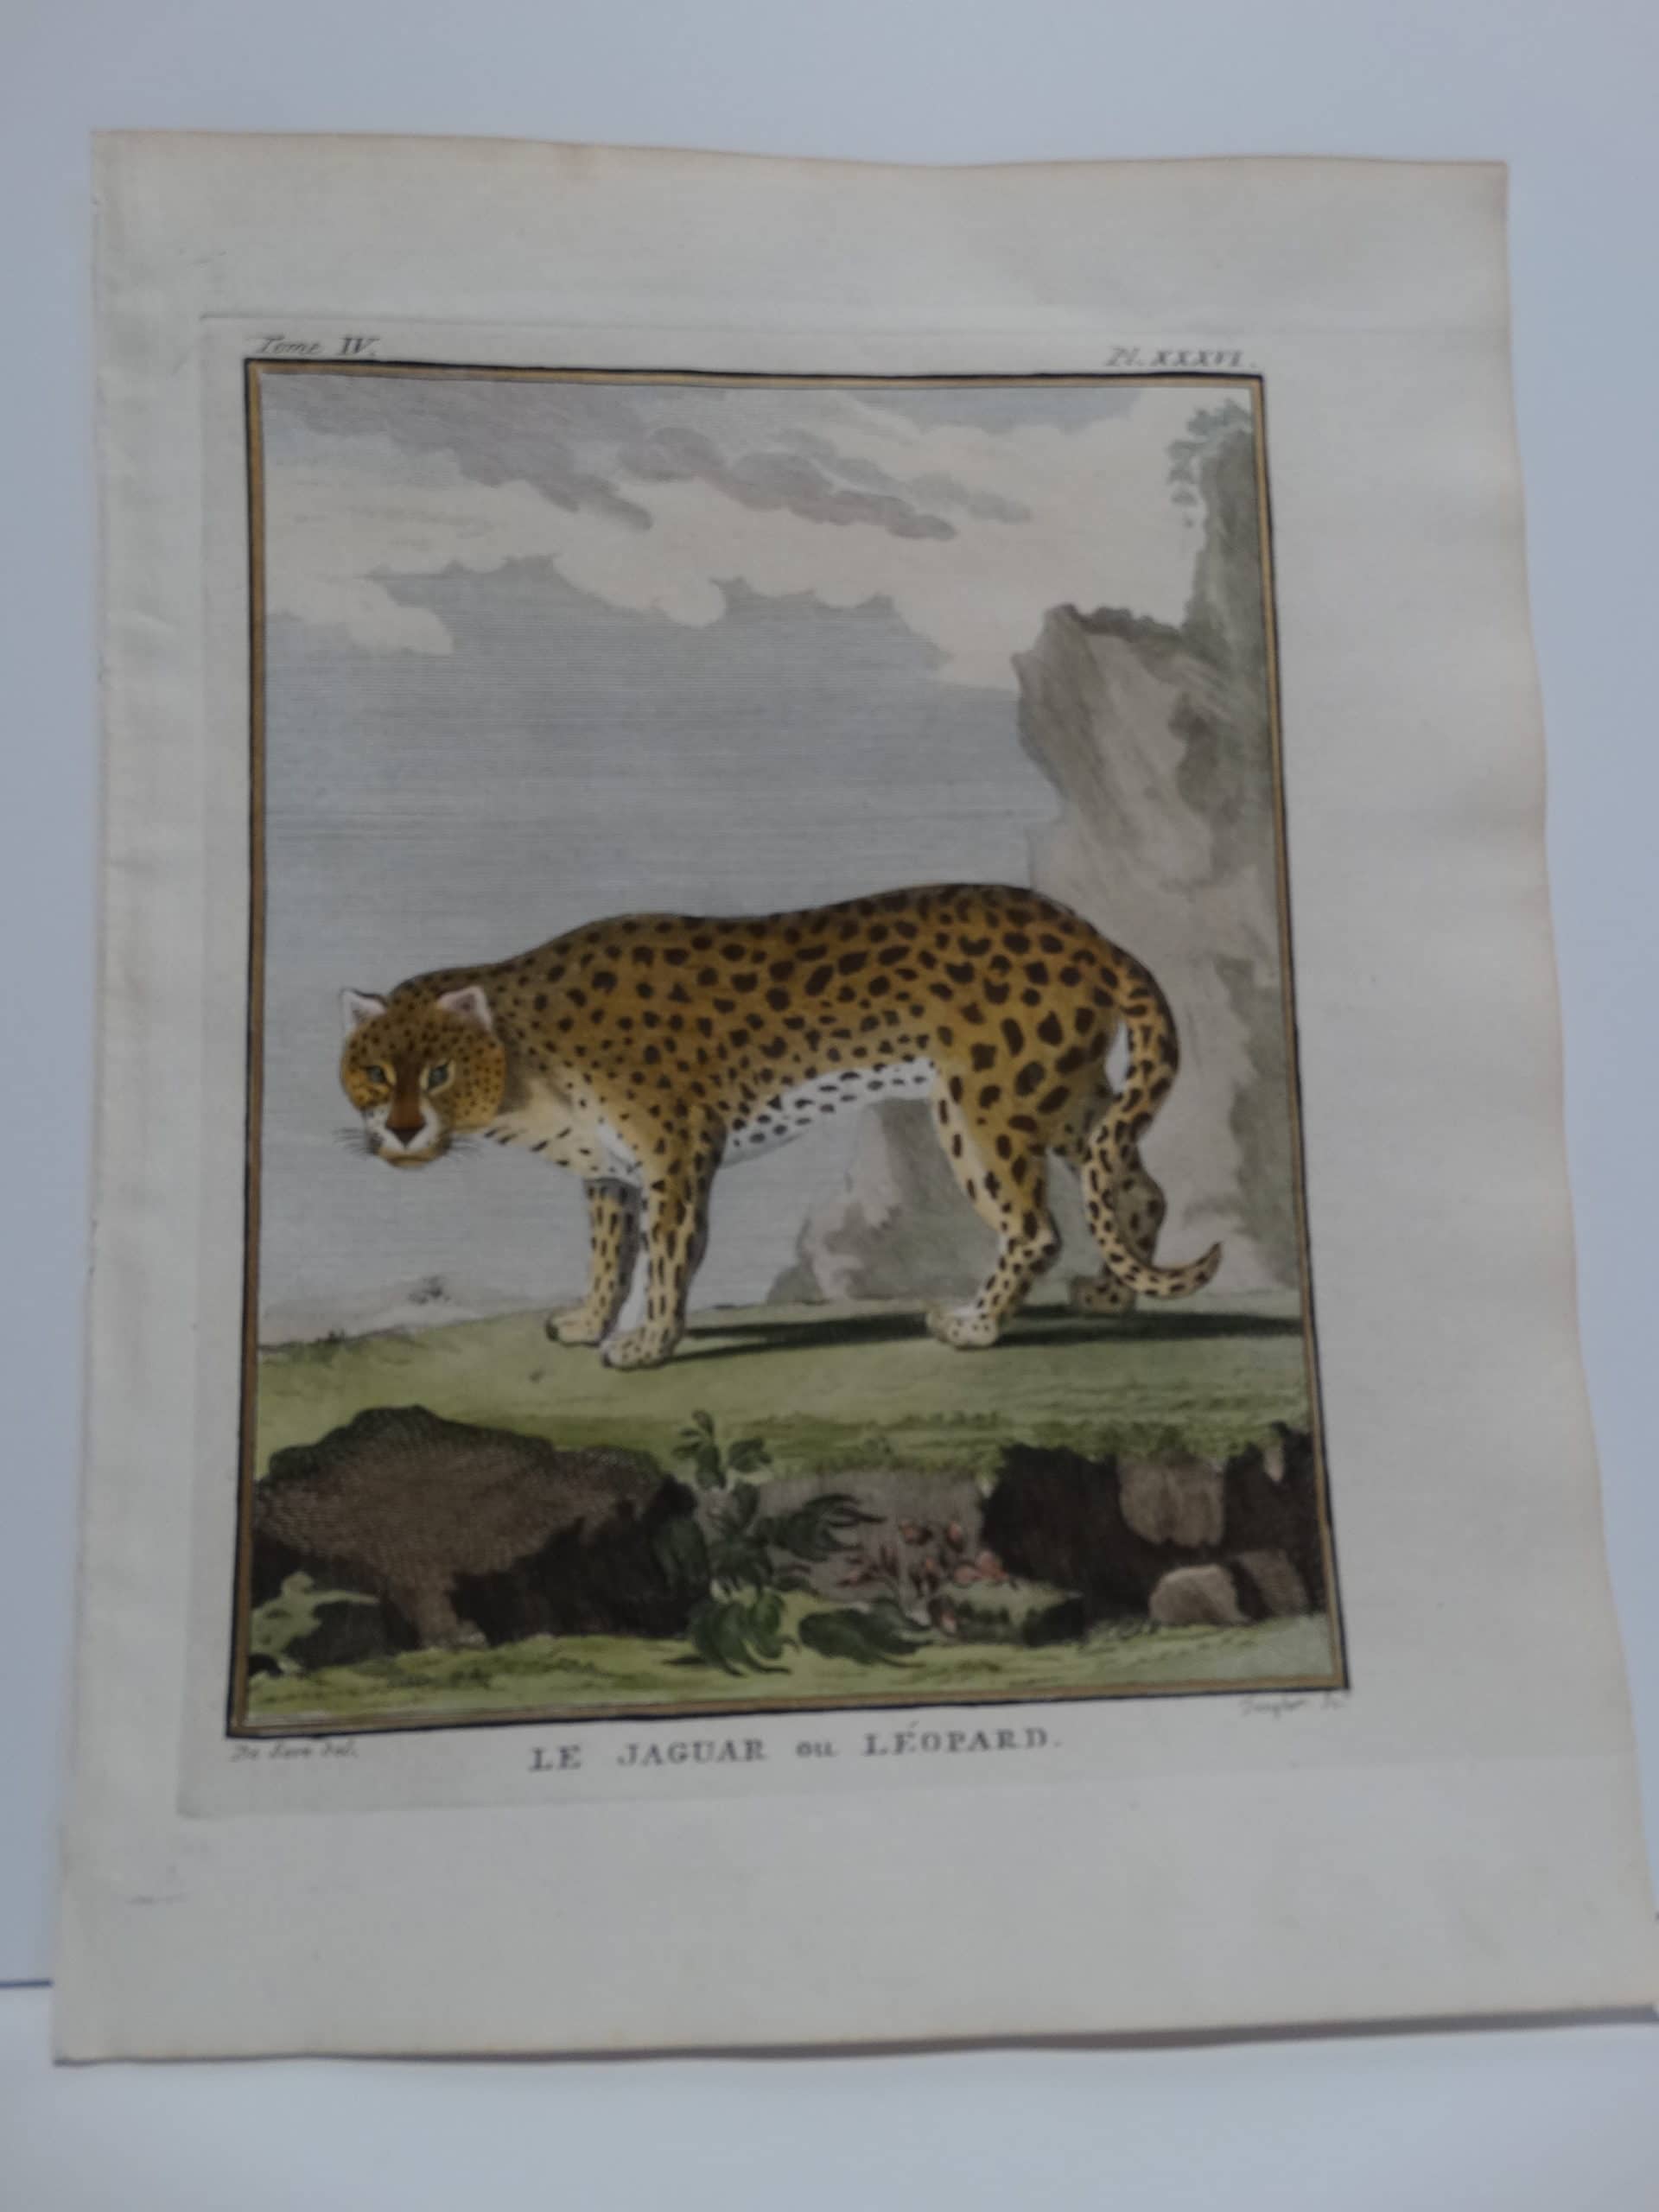 Very rare antique engraving of the fastest animal on Earth, the Jaquar.